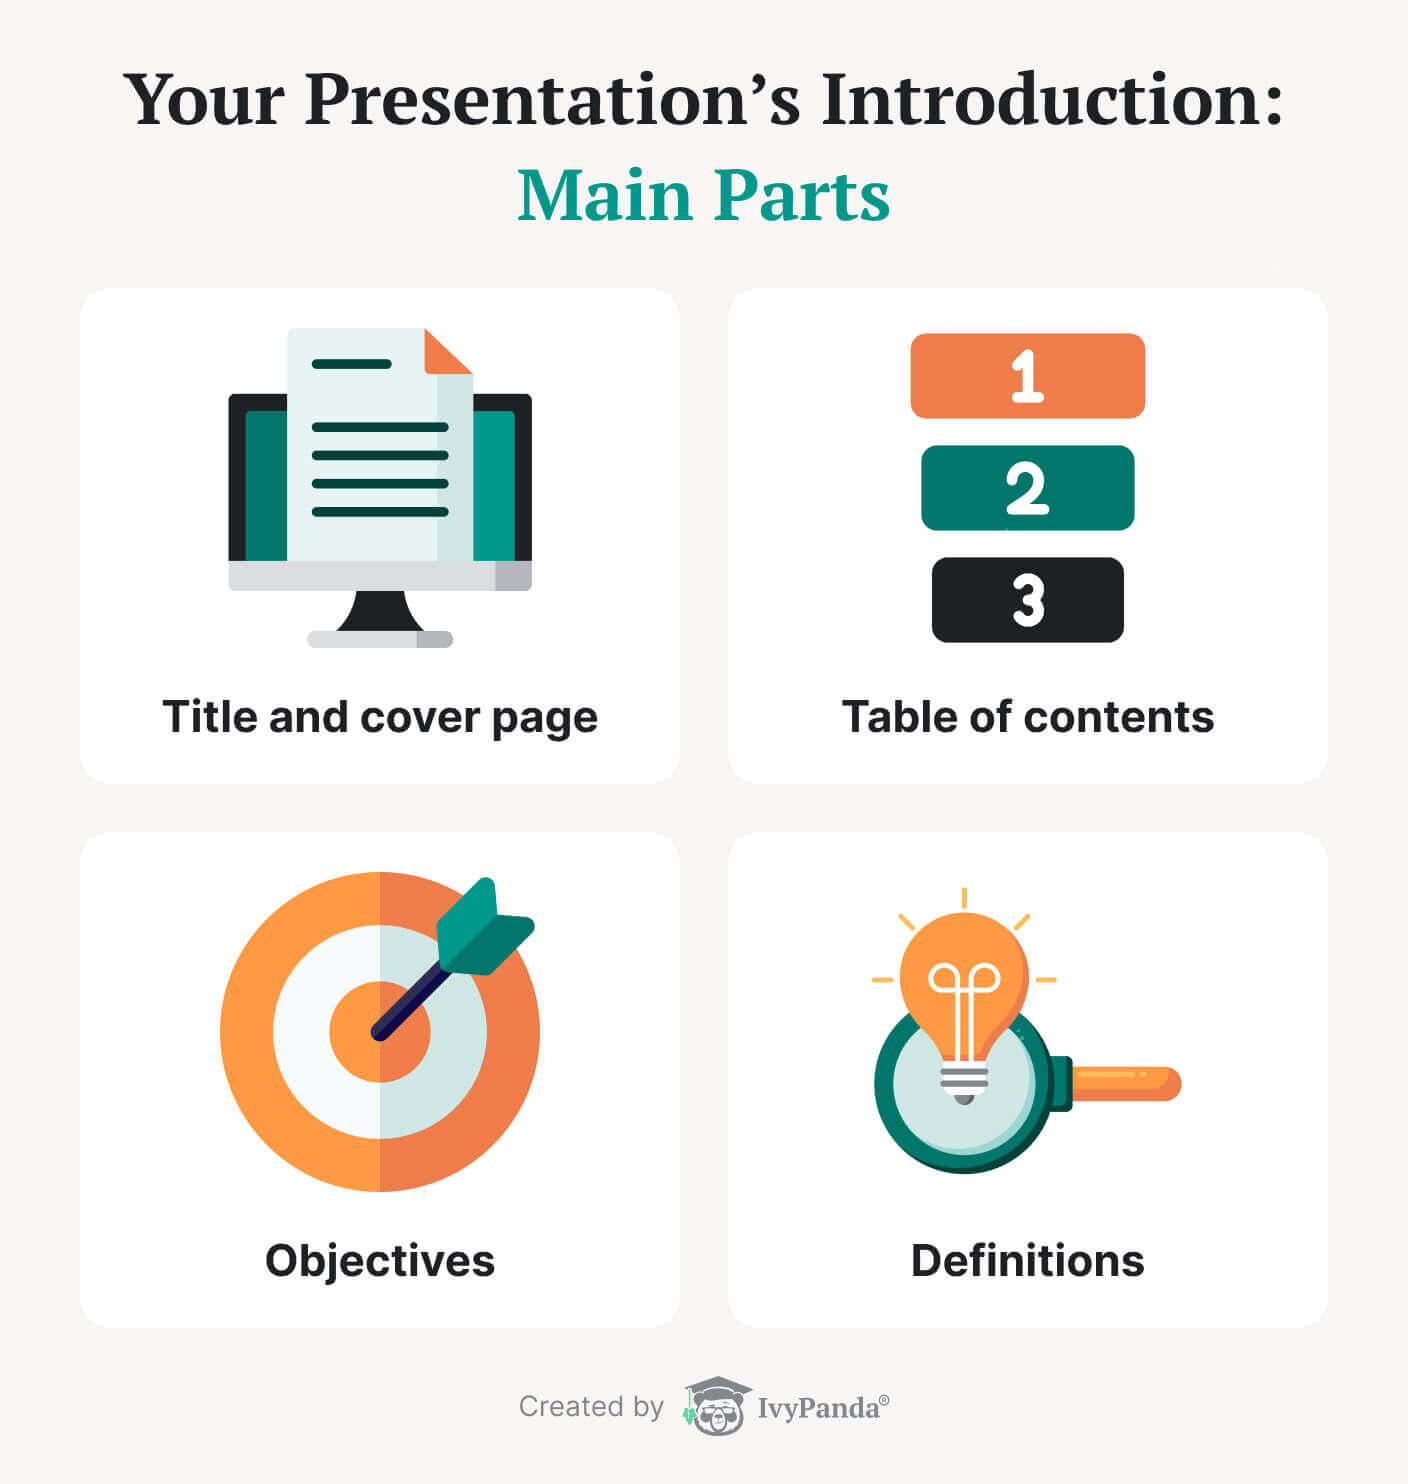 ___ of a presentation is the most important part